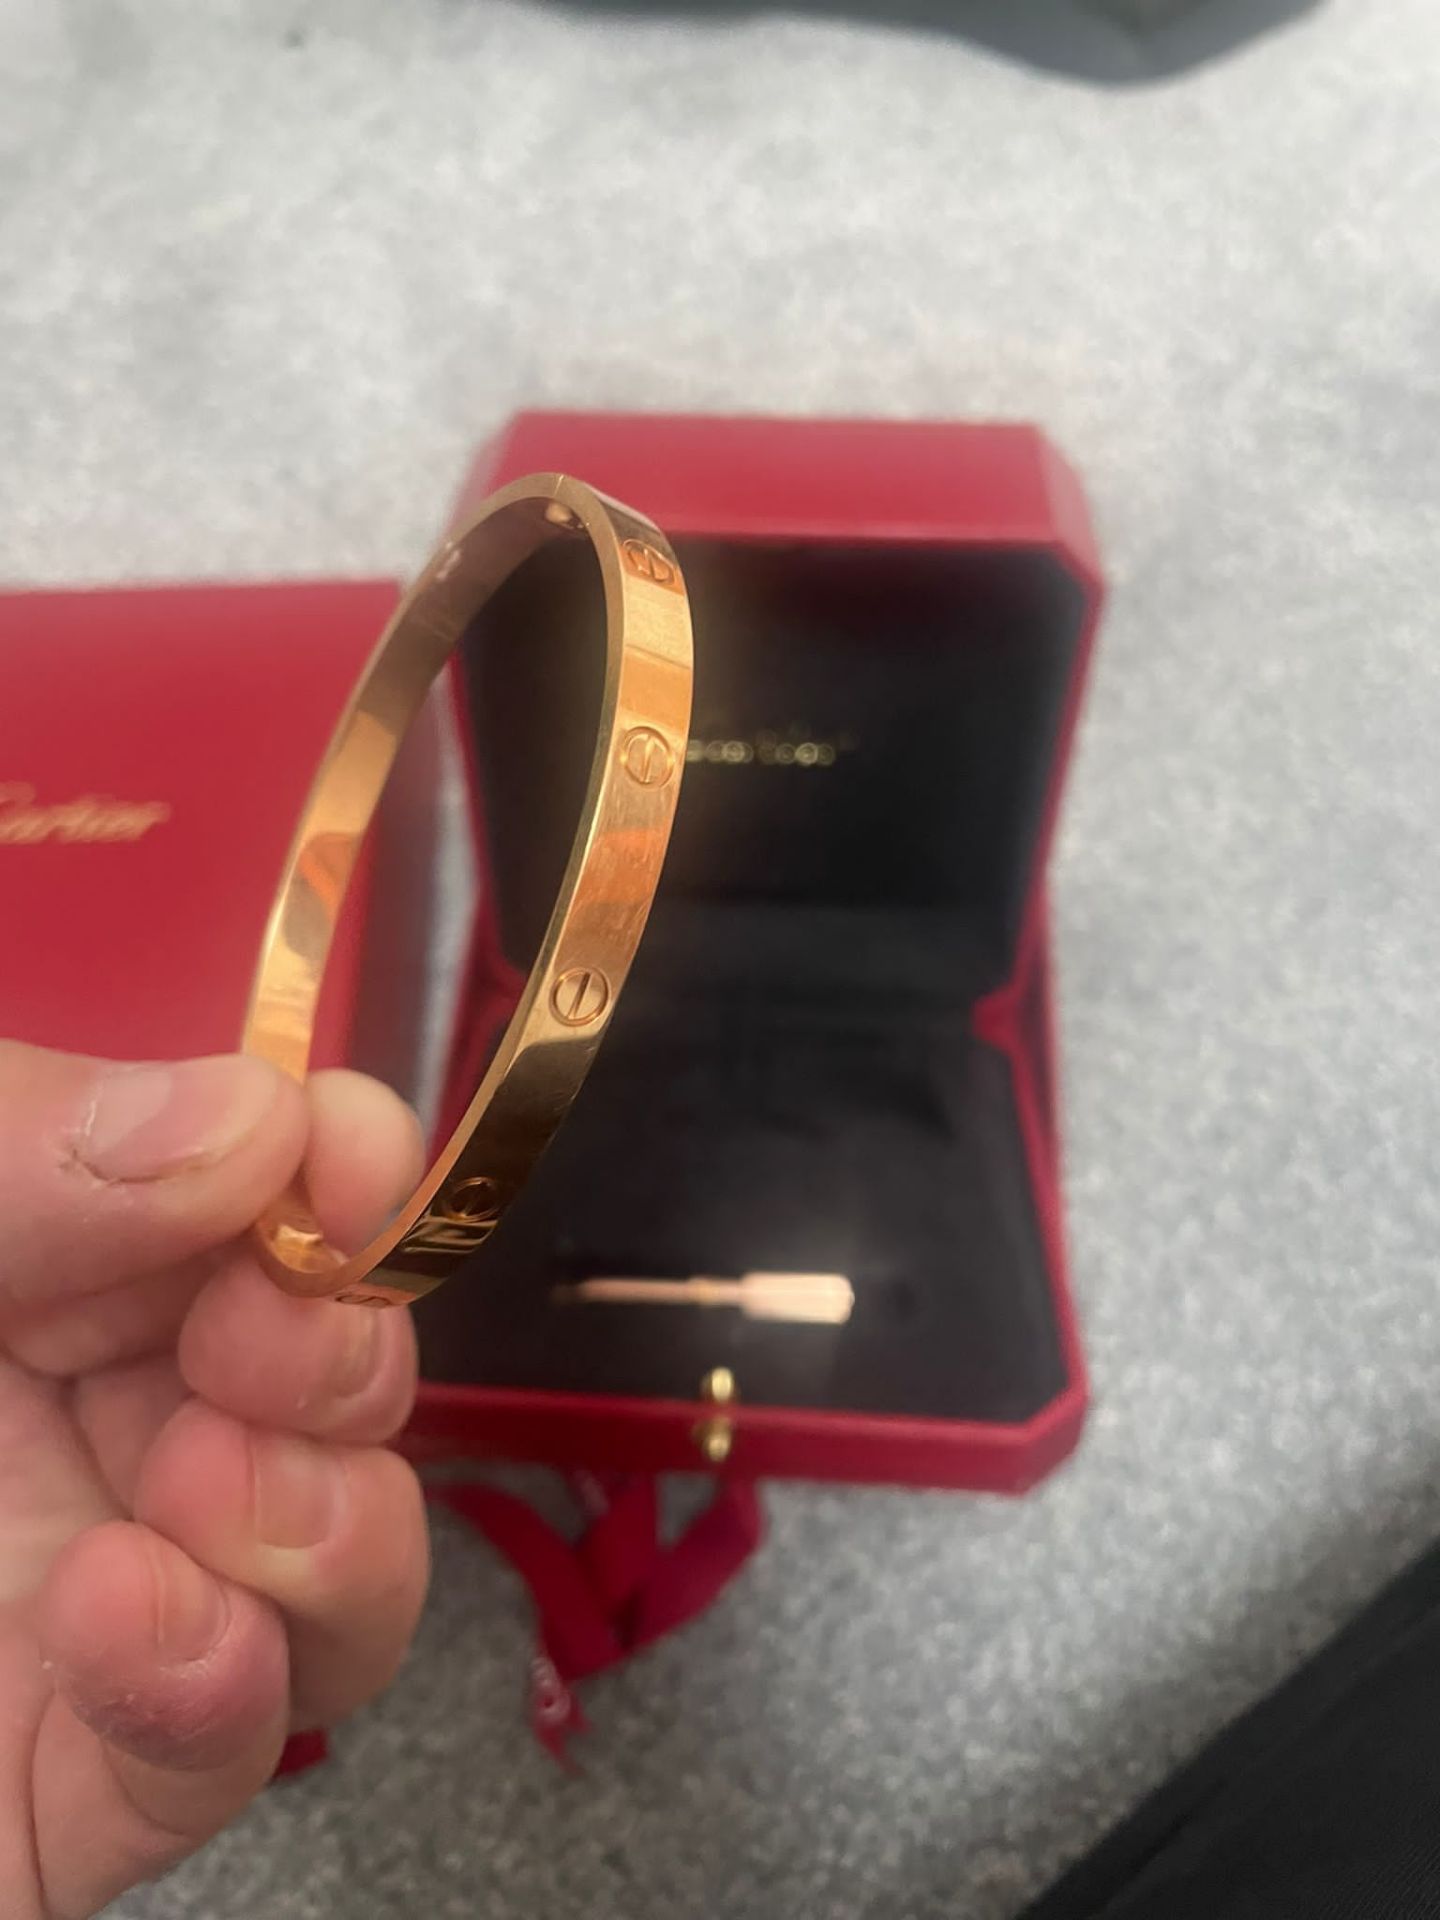 CARTIER "LOVE" 18K ROSE GOLD BANGLE FROM HARRODS, LONDON (SIZE 20CM - 6.1MM) - Image 7 of 8